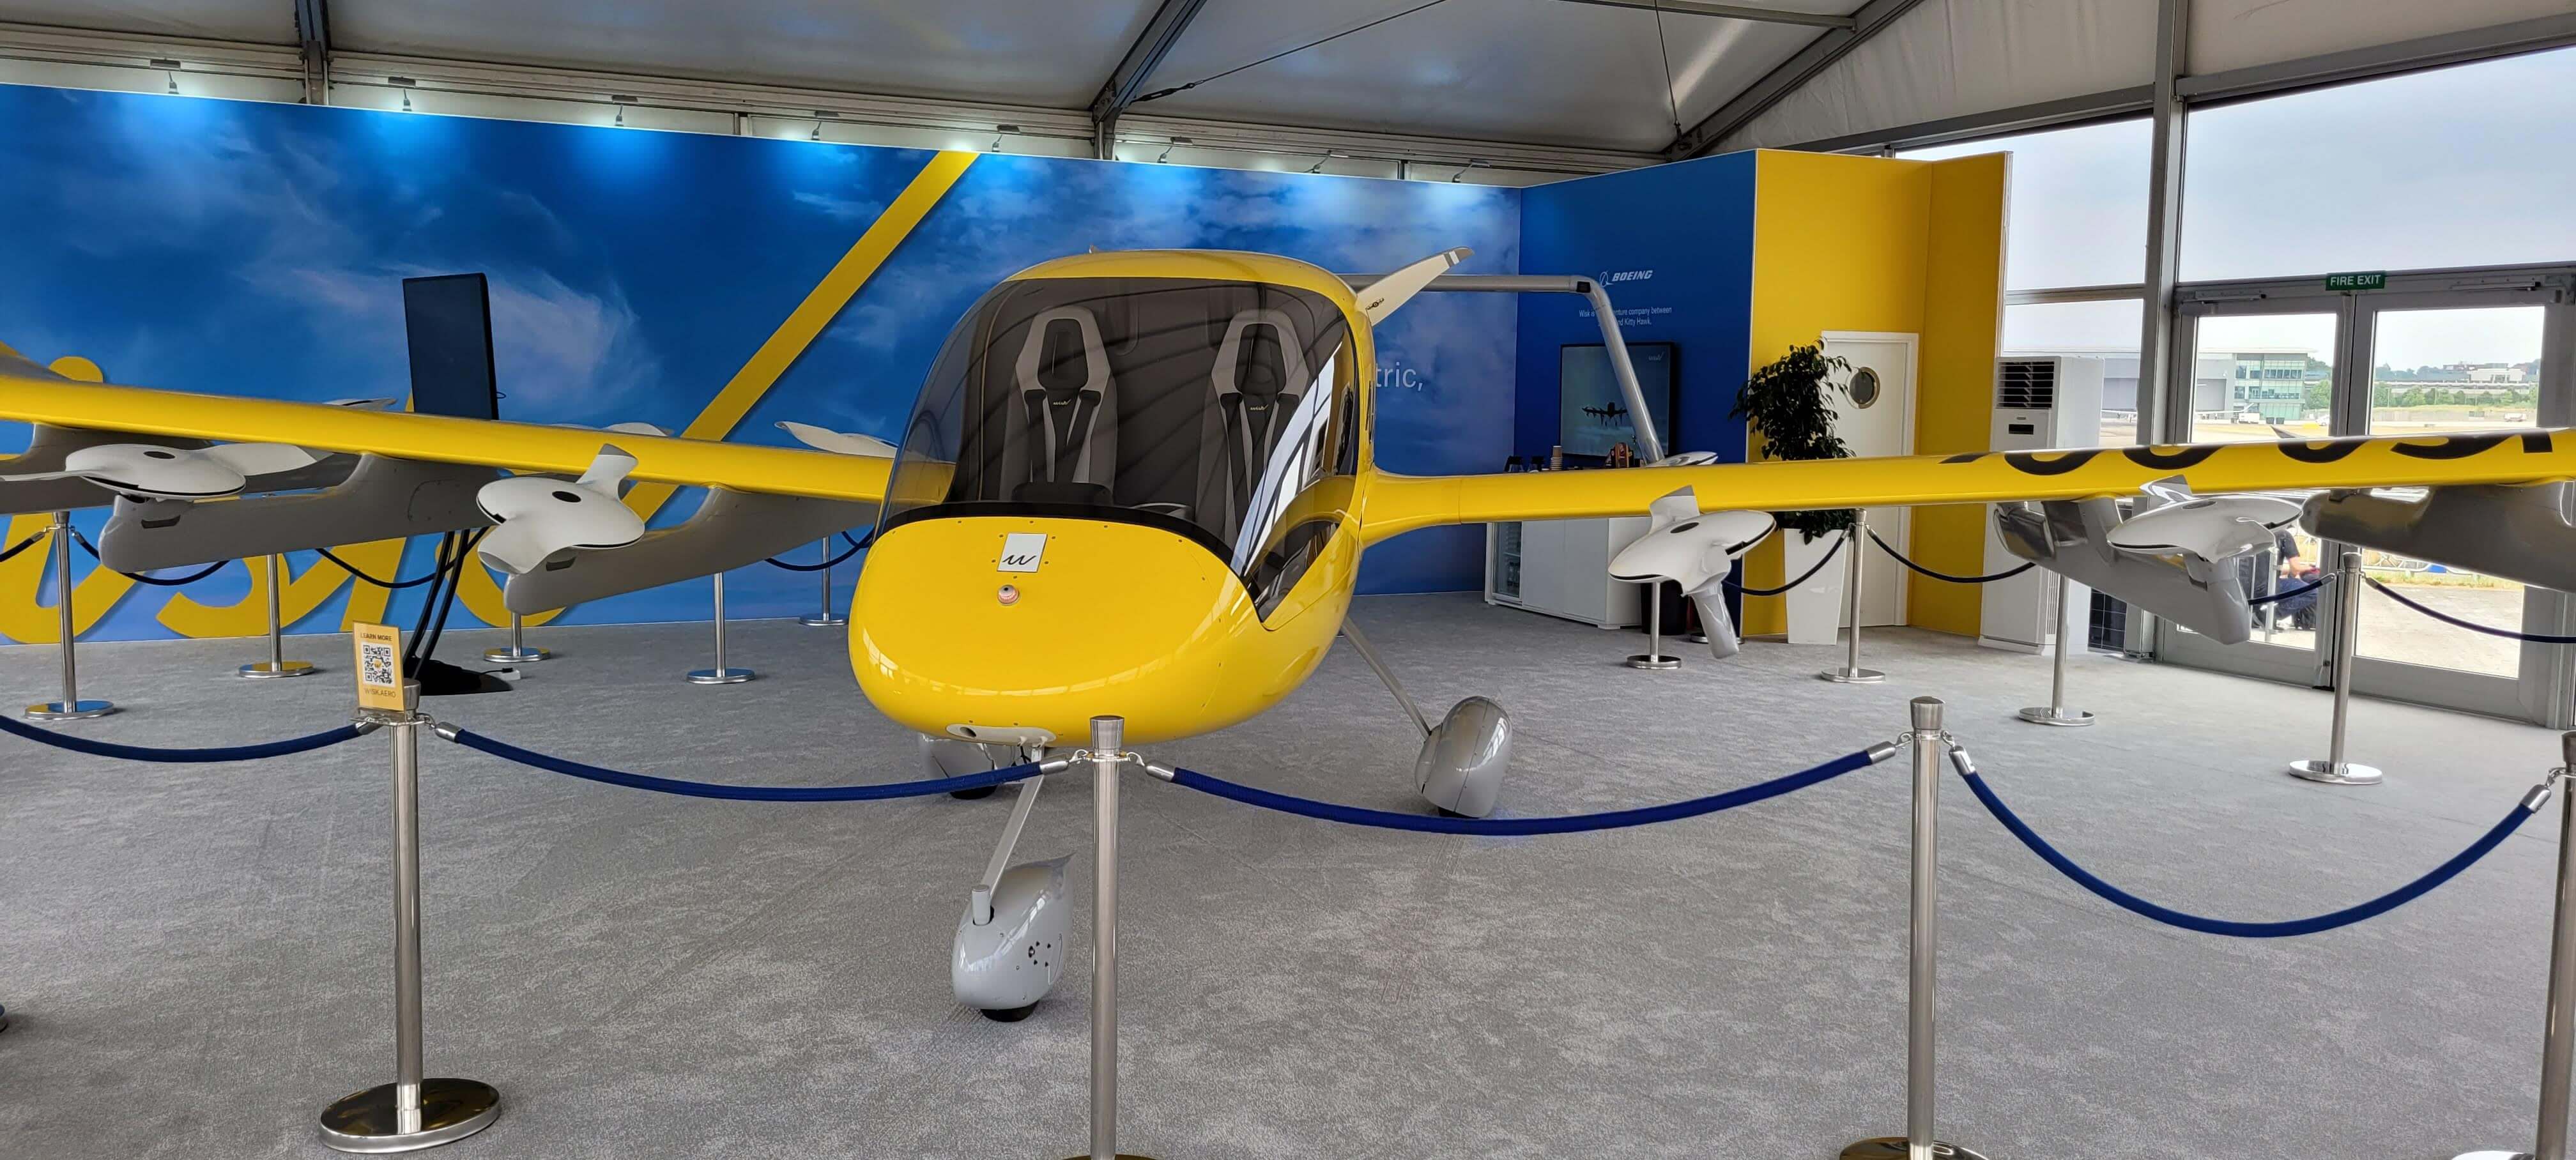 front view of Wisk 5th gen eVTOL at Farnborough